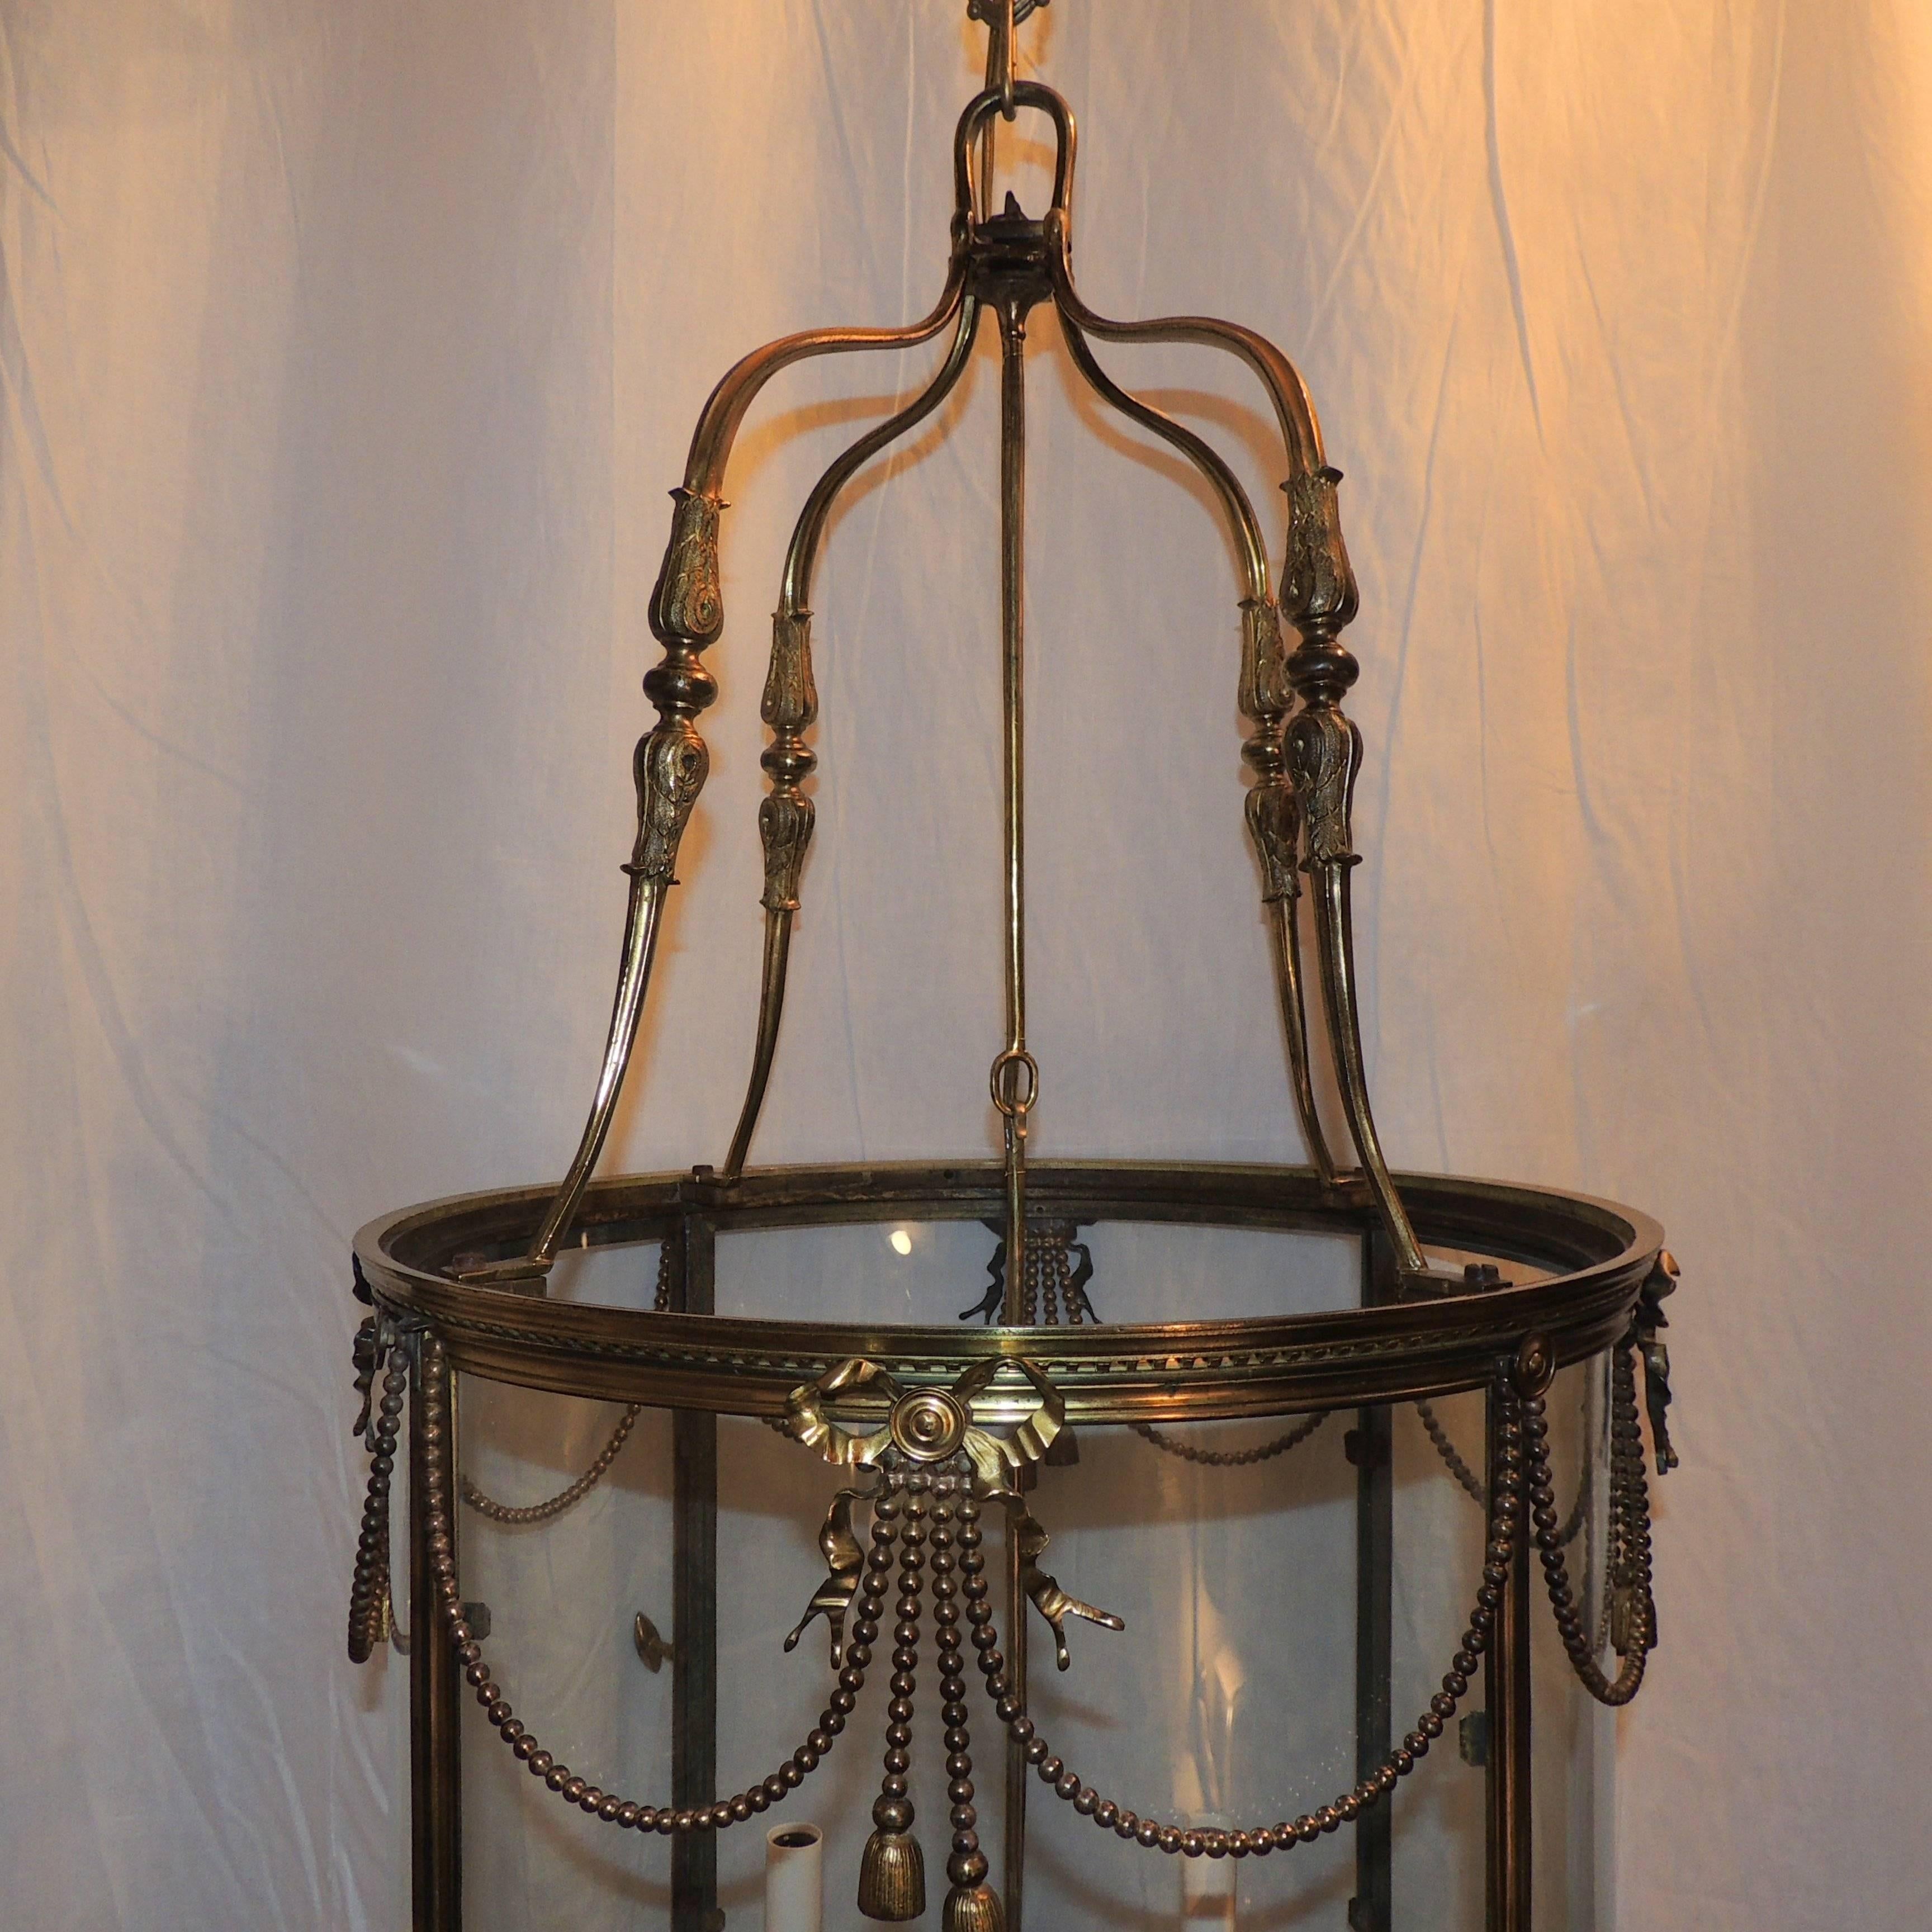 Palatial Large French Louis XVI Gilt Bronze Ribbon & Bow Swag Lantern Chandelier In Good Condition For Sale In Roslyn, NY